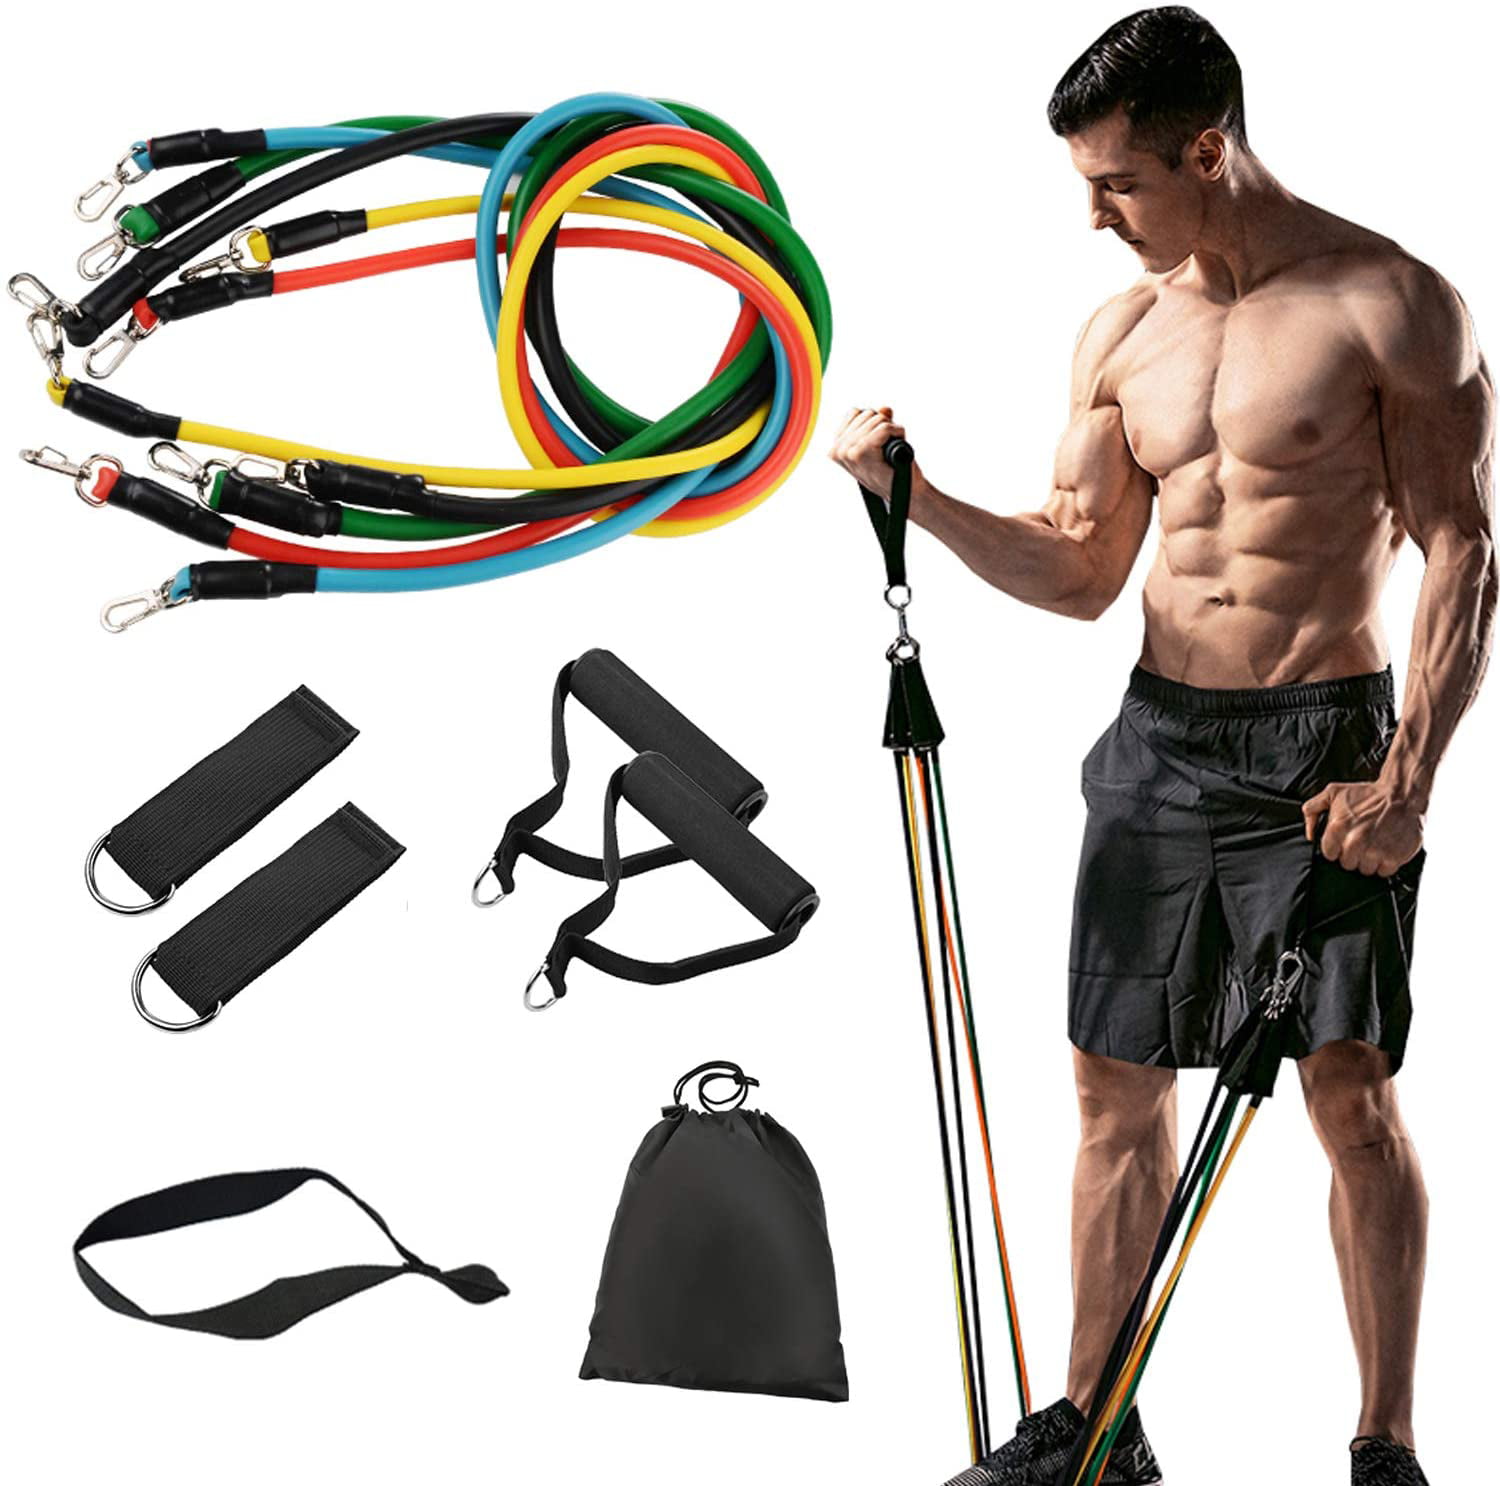 Home workout Resistance Bands Set Yoga Gym Exercise Equipments Training Fitness 